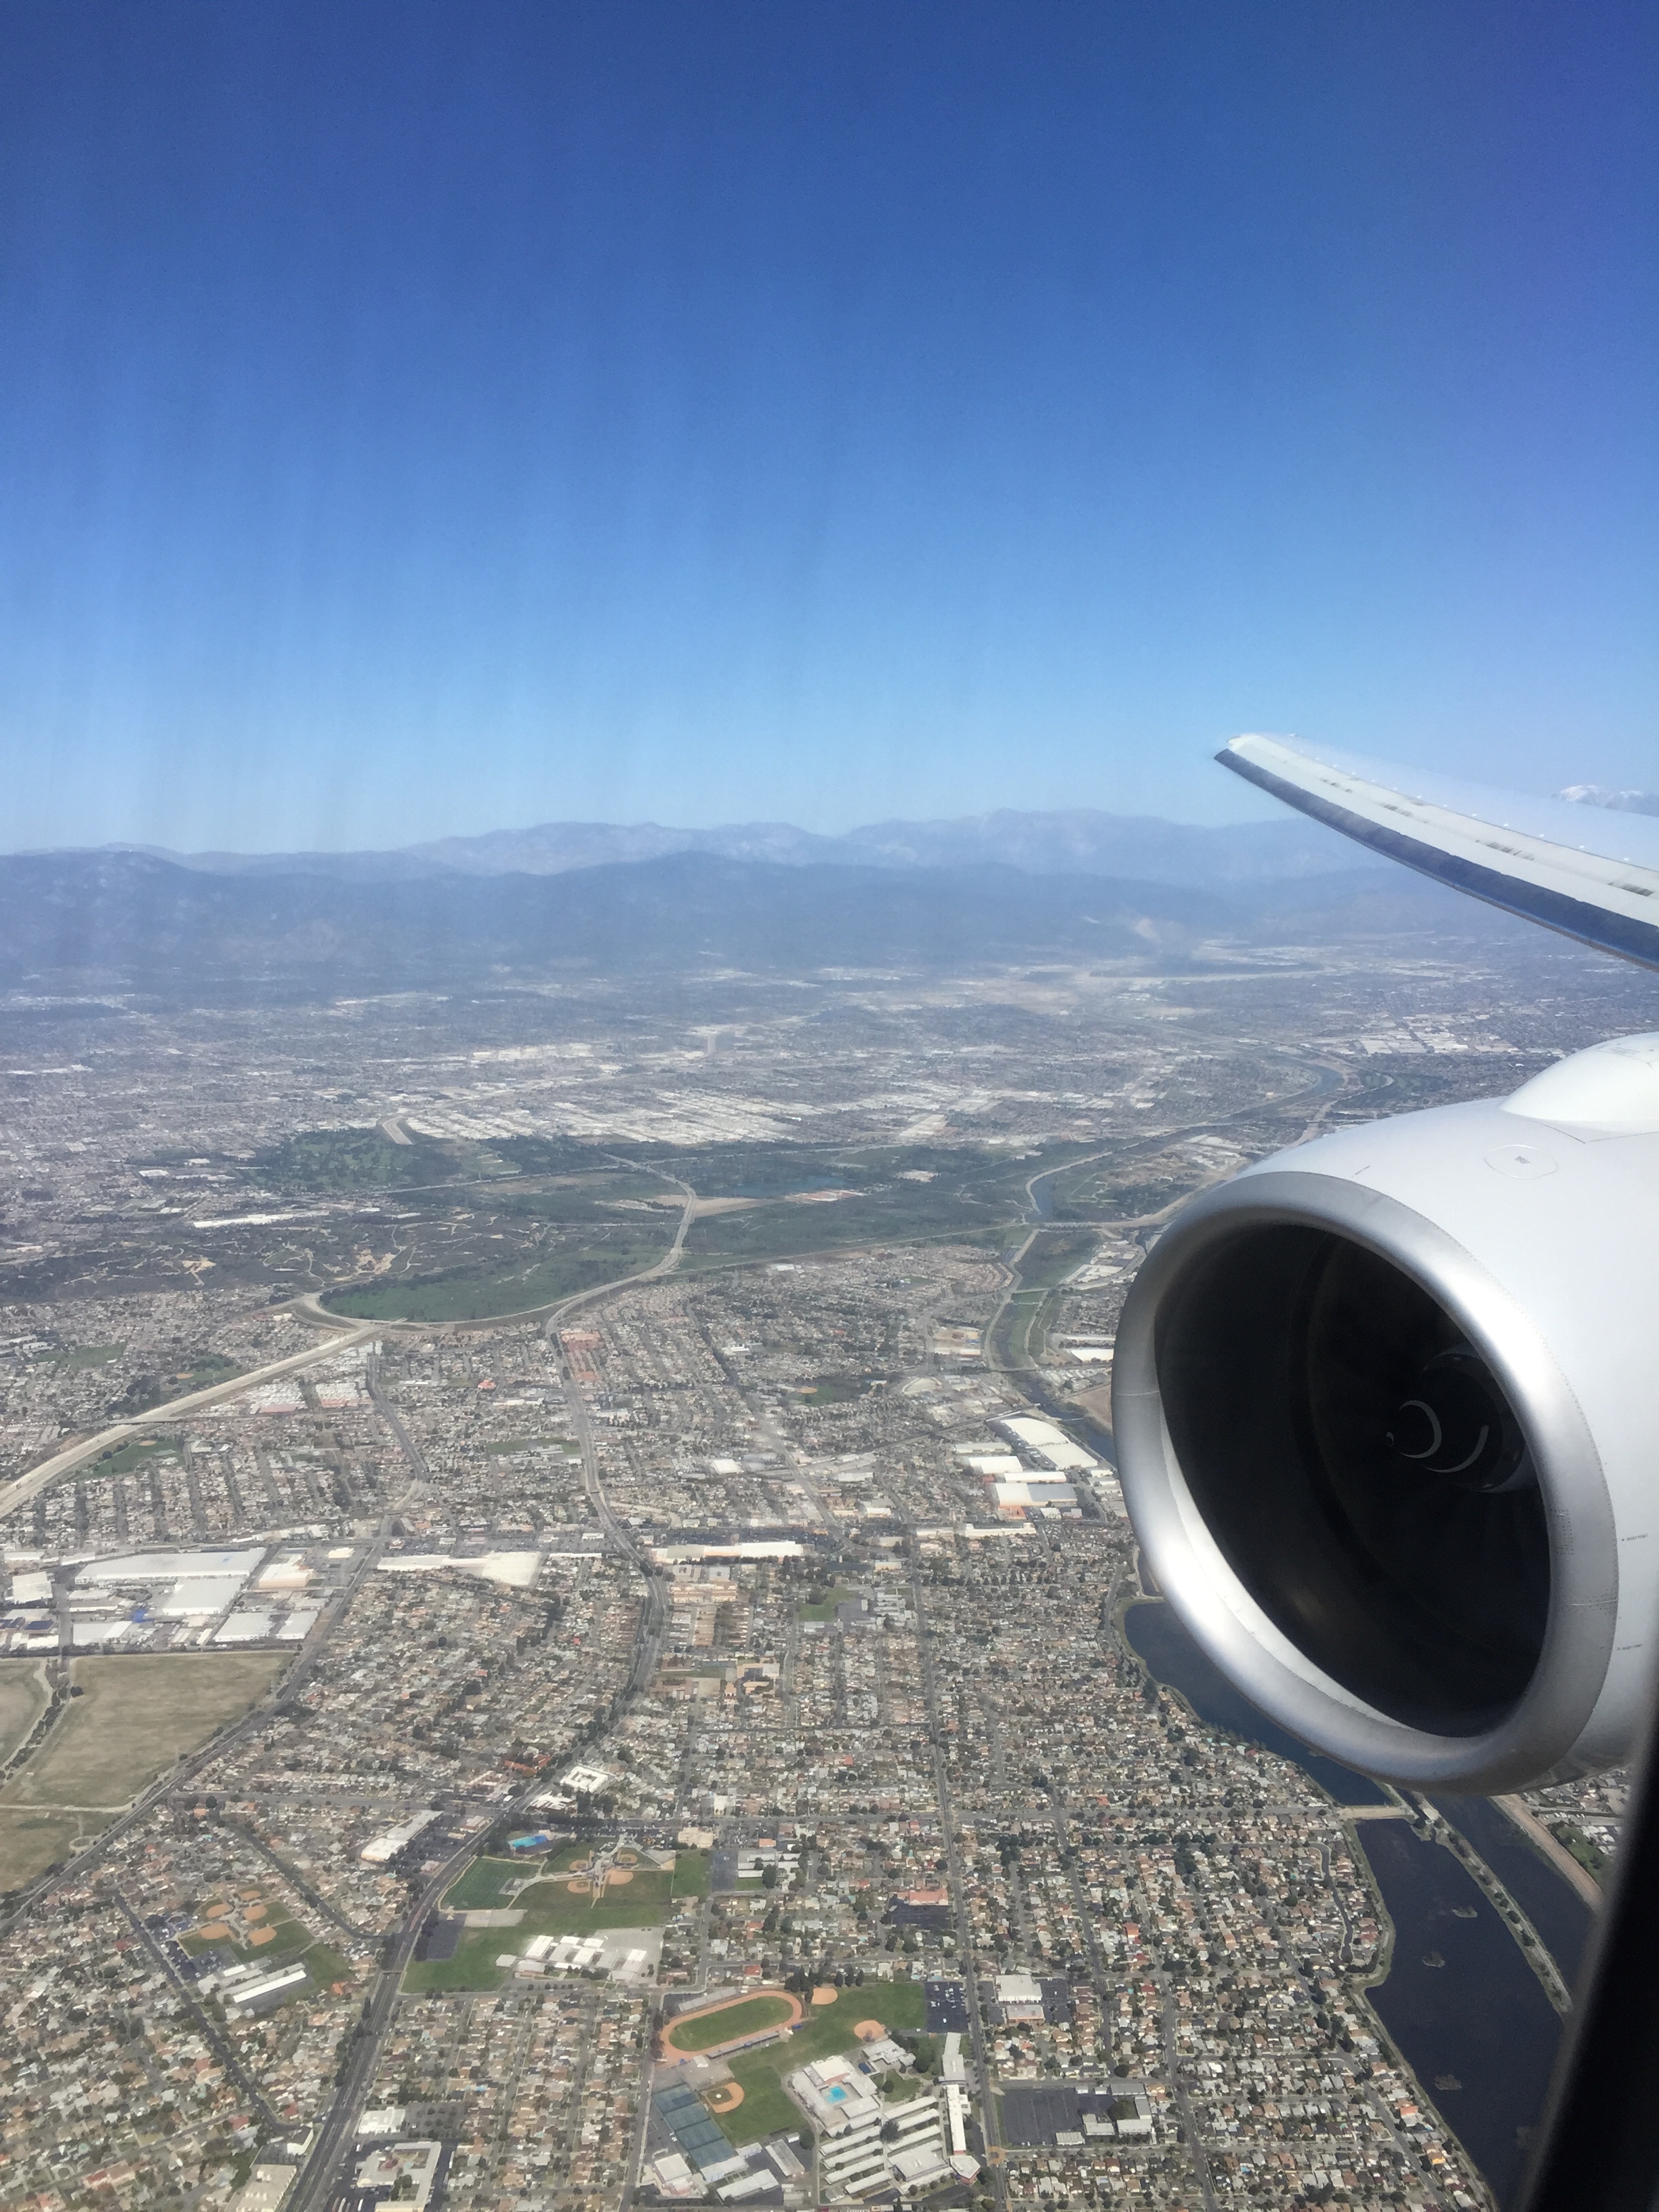 Approach to LAX